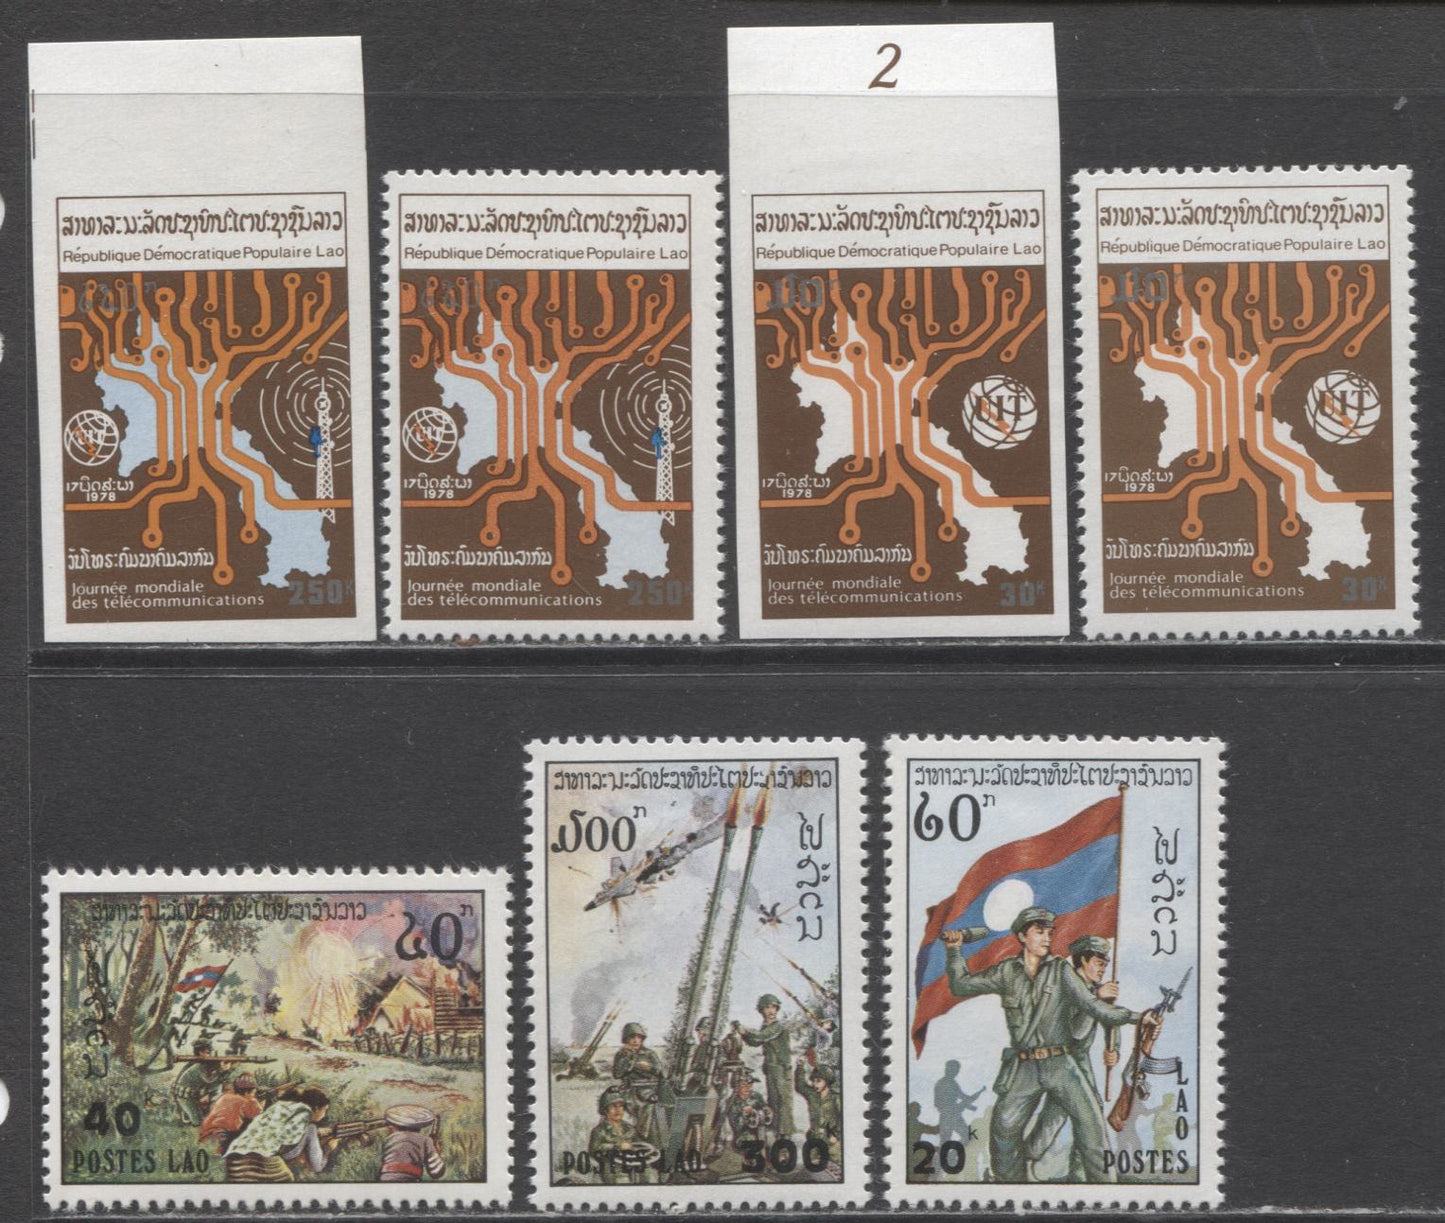 Lot 61 Laos SC#298/305 1978 Commemorative Issues, A VFNH Range Of Perf & Imperf Singles, 2017 Scott Cat. $15.75 USD, Click on Listing to See ALL Pictures